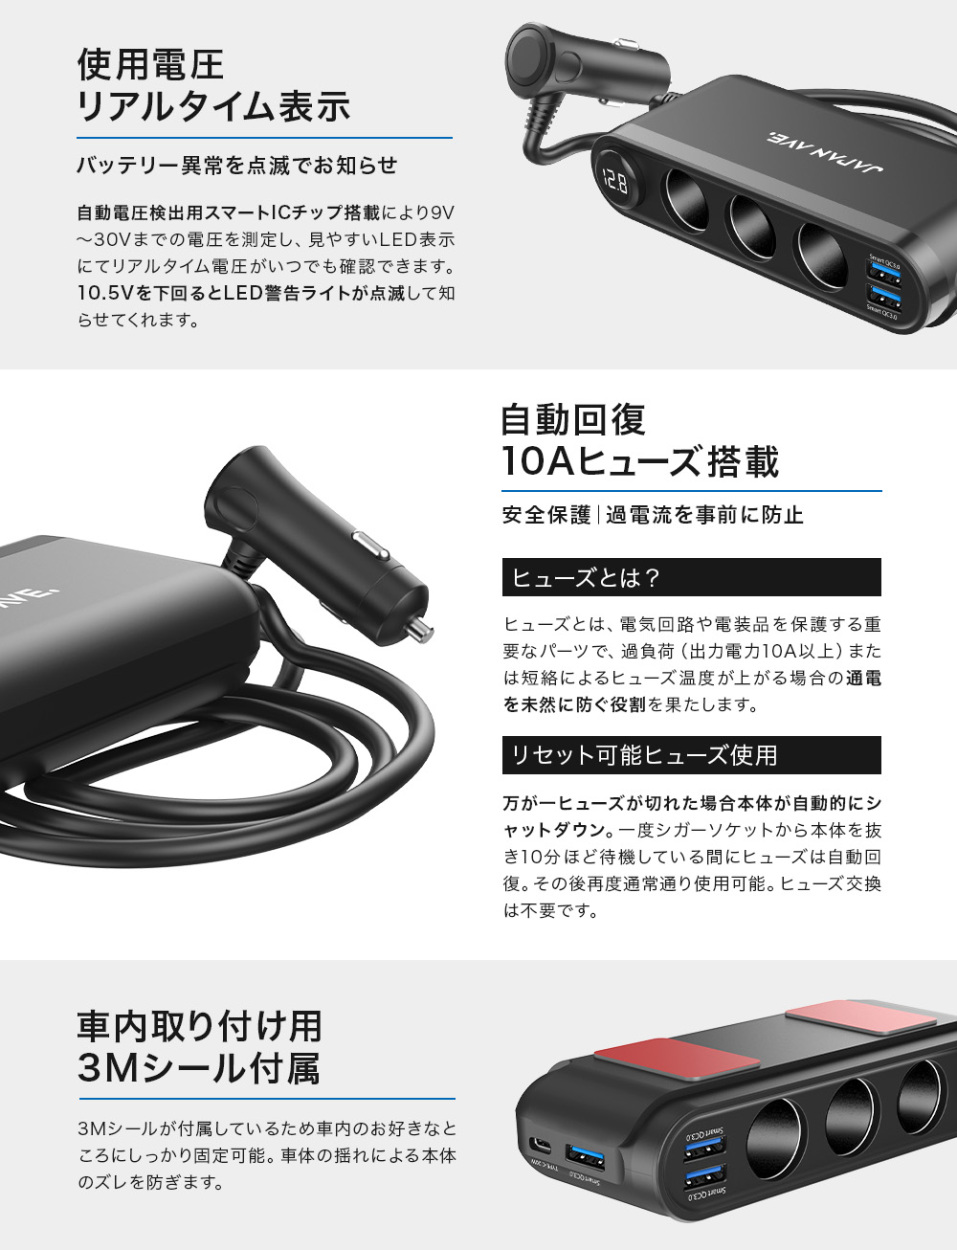 PD Quick charge 3.0 搭載 増設 シガーソケット 3連 カーチャージャー